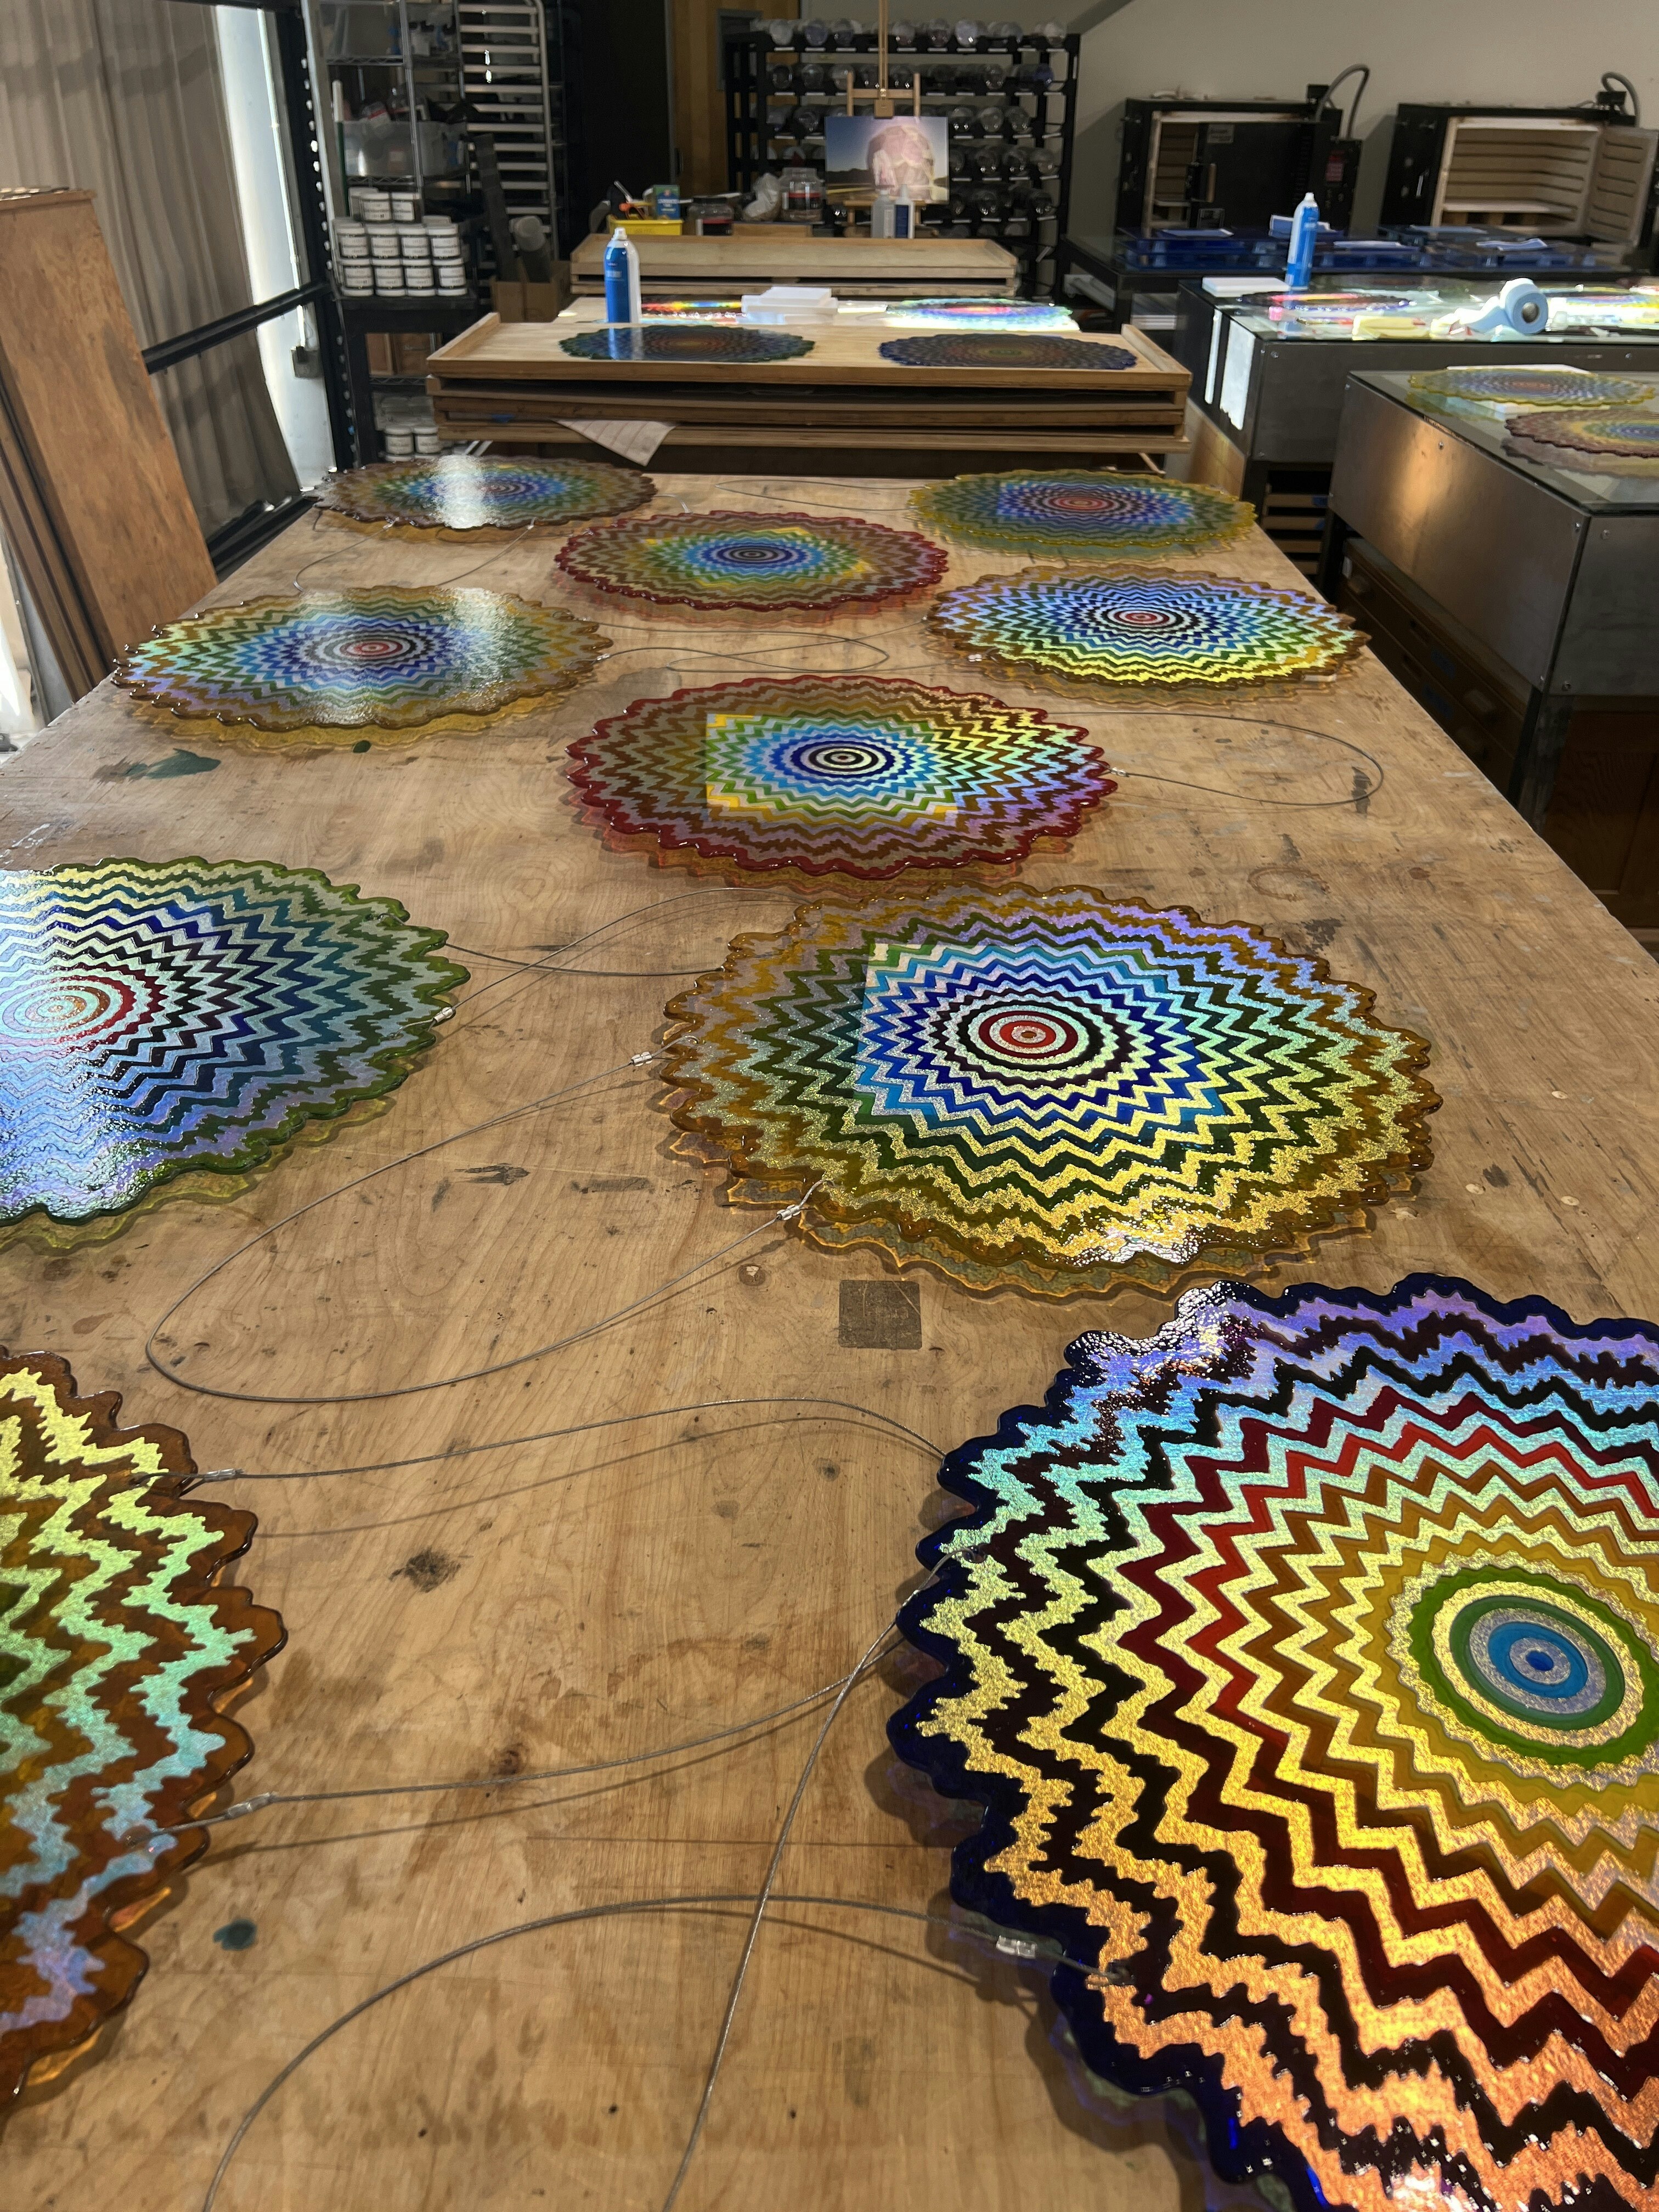 Collective Post - The making of Dichroic Mandala 🌀